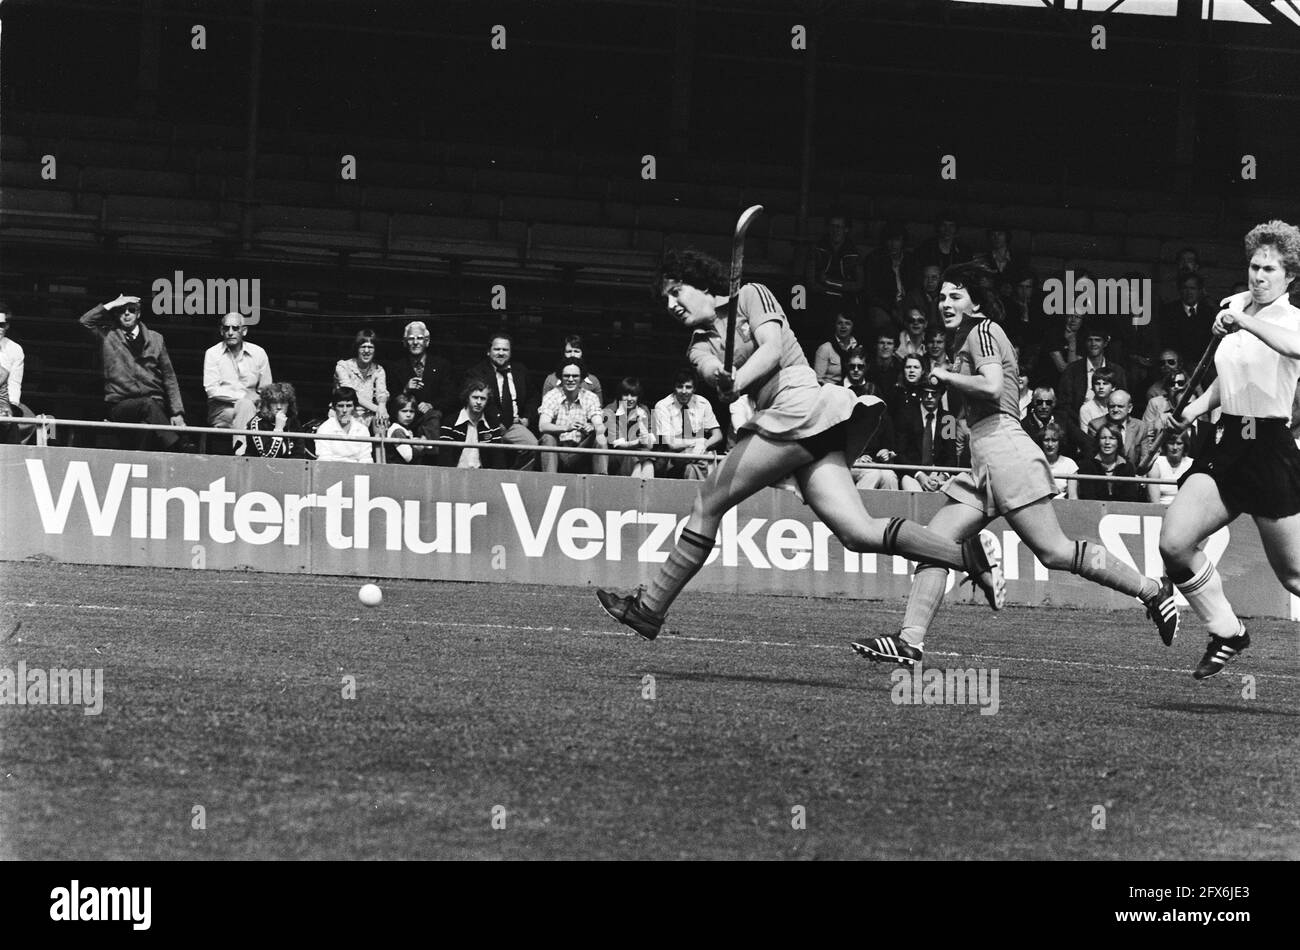 Hockey international match Netherlands against Germany (ladies), Margriet Blijerveld scores, center Toos Bax, May 1, 1978, field hockey, sports, The Netherlands, 20th century press agency photo, news to remember, documentary, historic photography 1945-1990, visual stories, human history of the Twentieth Century, capturing moments in time Stock Photo